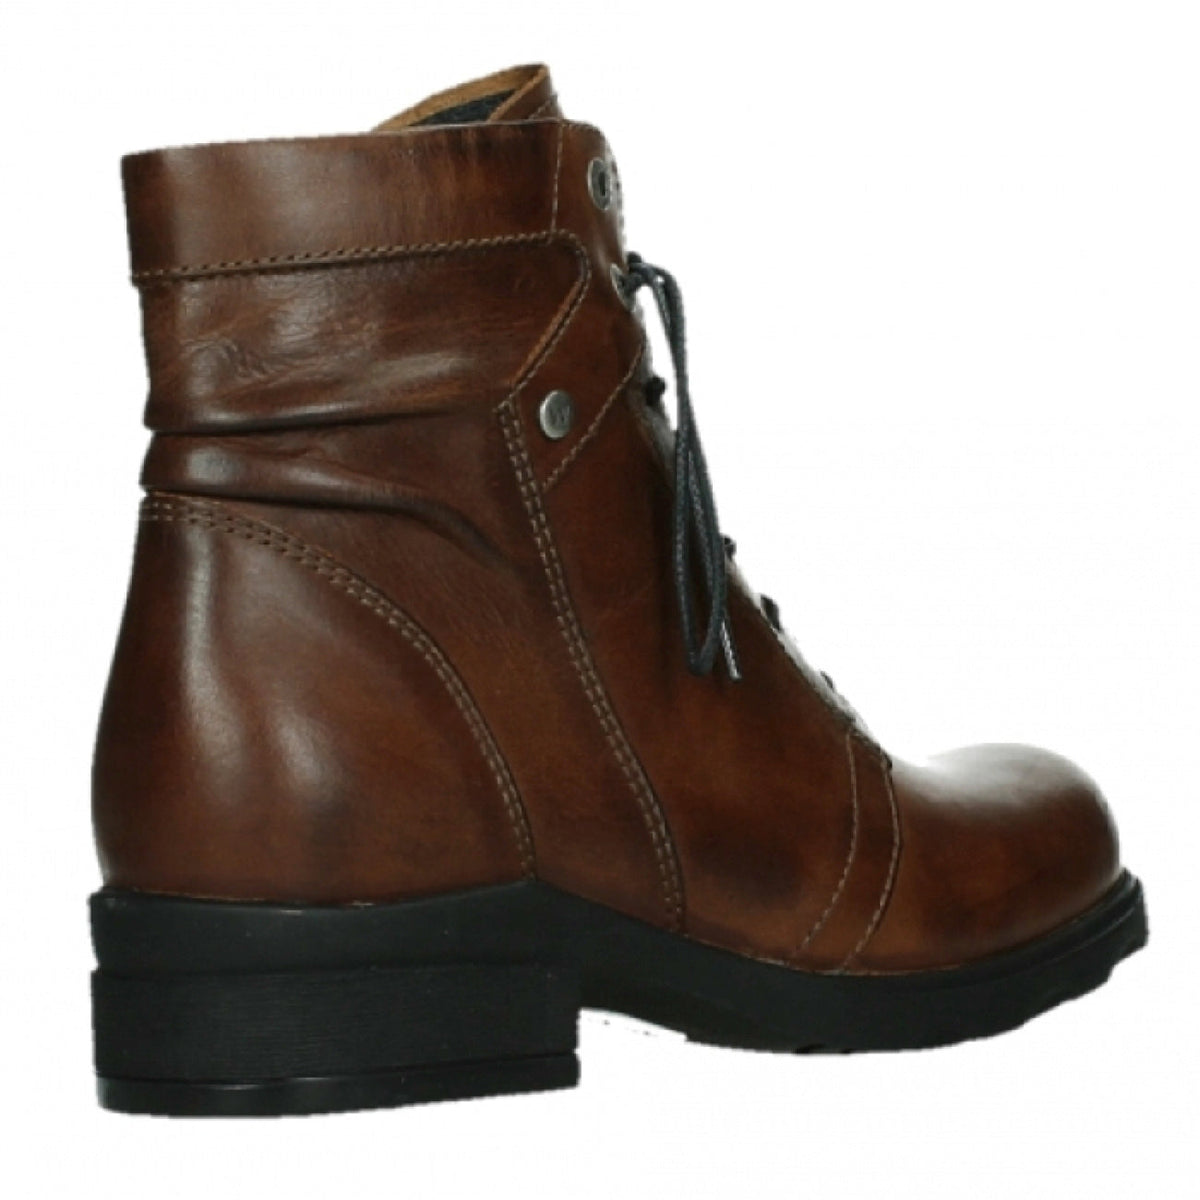 Wolky, Center XW, Boots, Velvet Leather, Cognac Uni Boots Wolky 